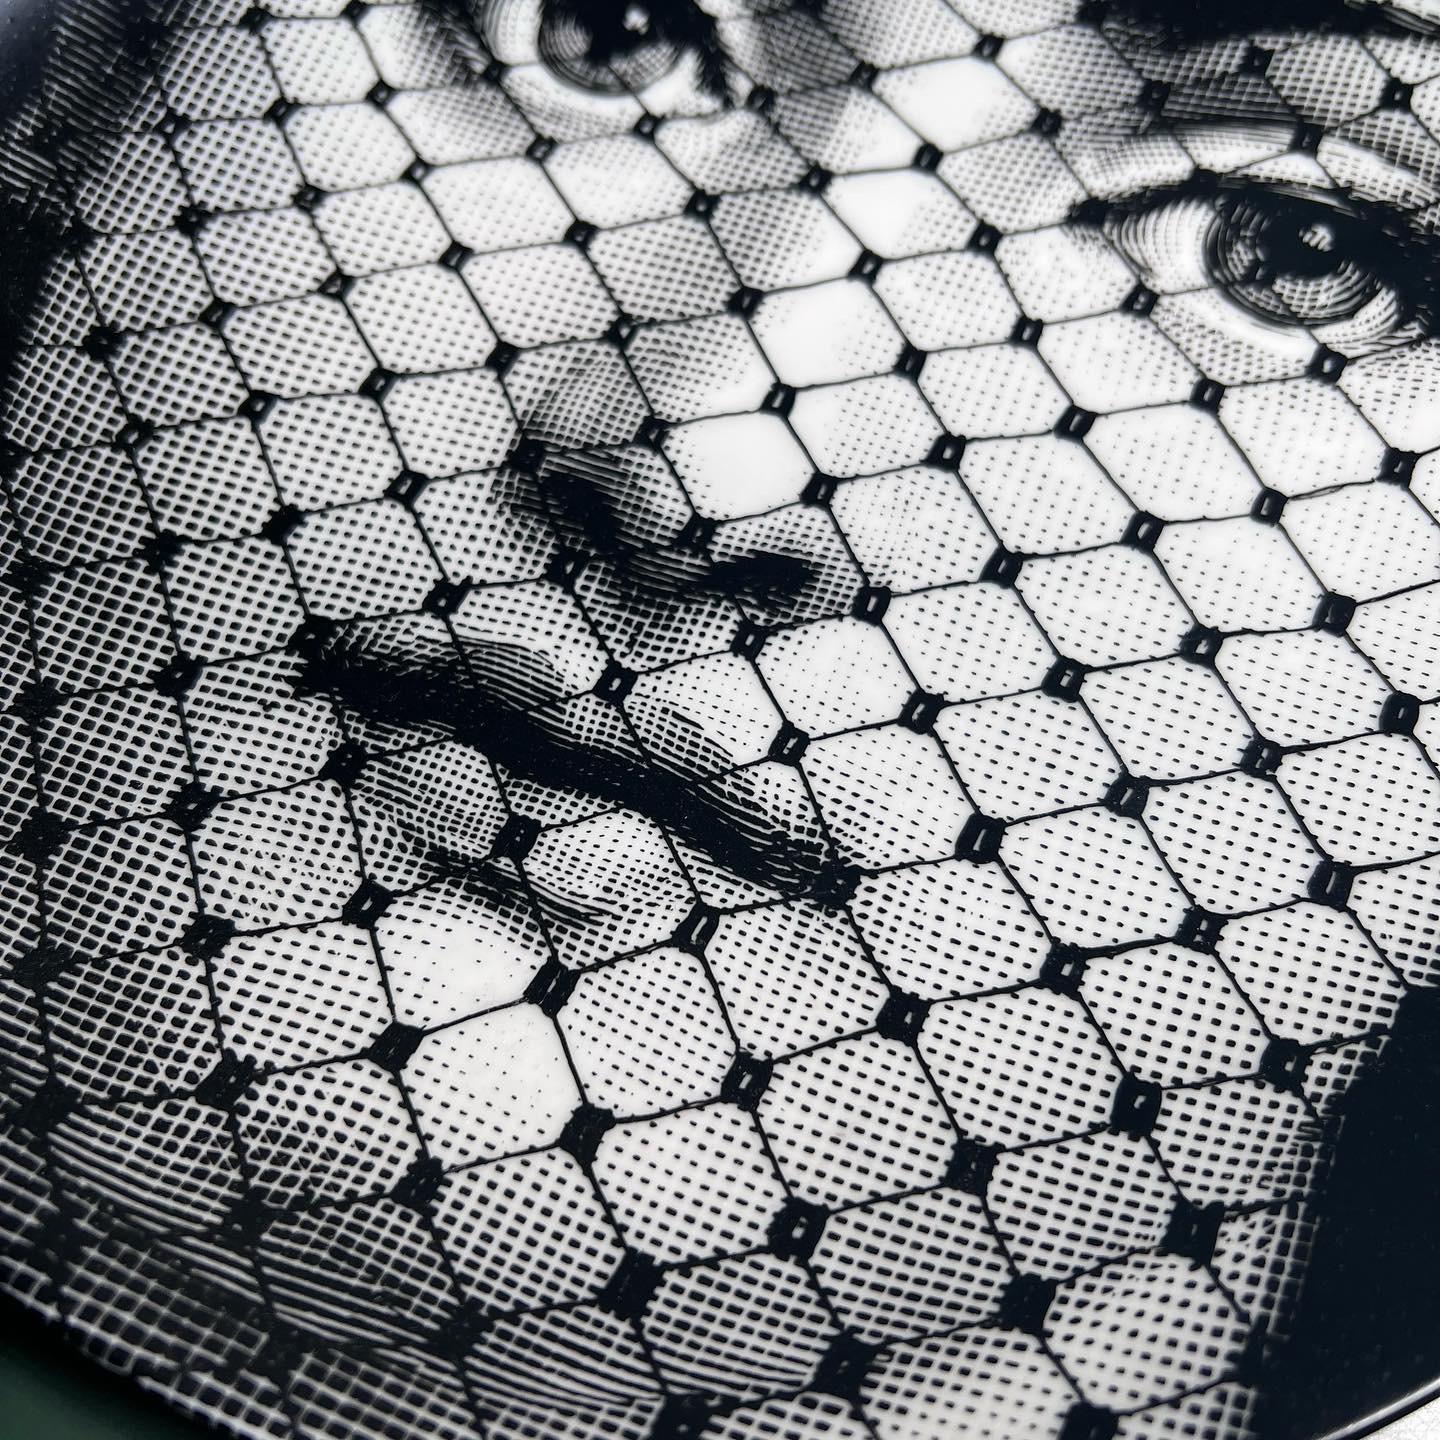 Have you ever wondered who's the woman that appears on the iconic Fornasetti plates? You might believe she's just an imaginary muse, dreamed by Piero Fornasetti. Turns out, she's way more real than that, as the Italian designer started the now